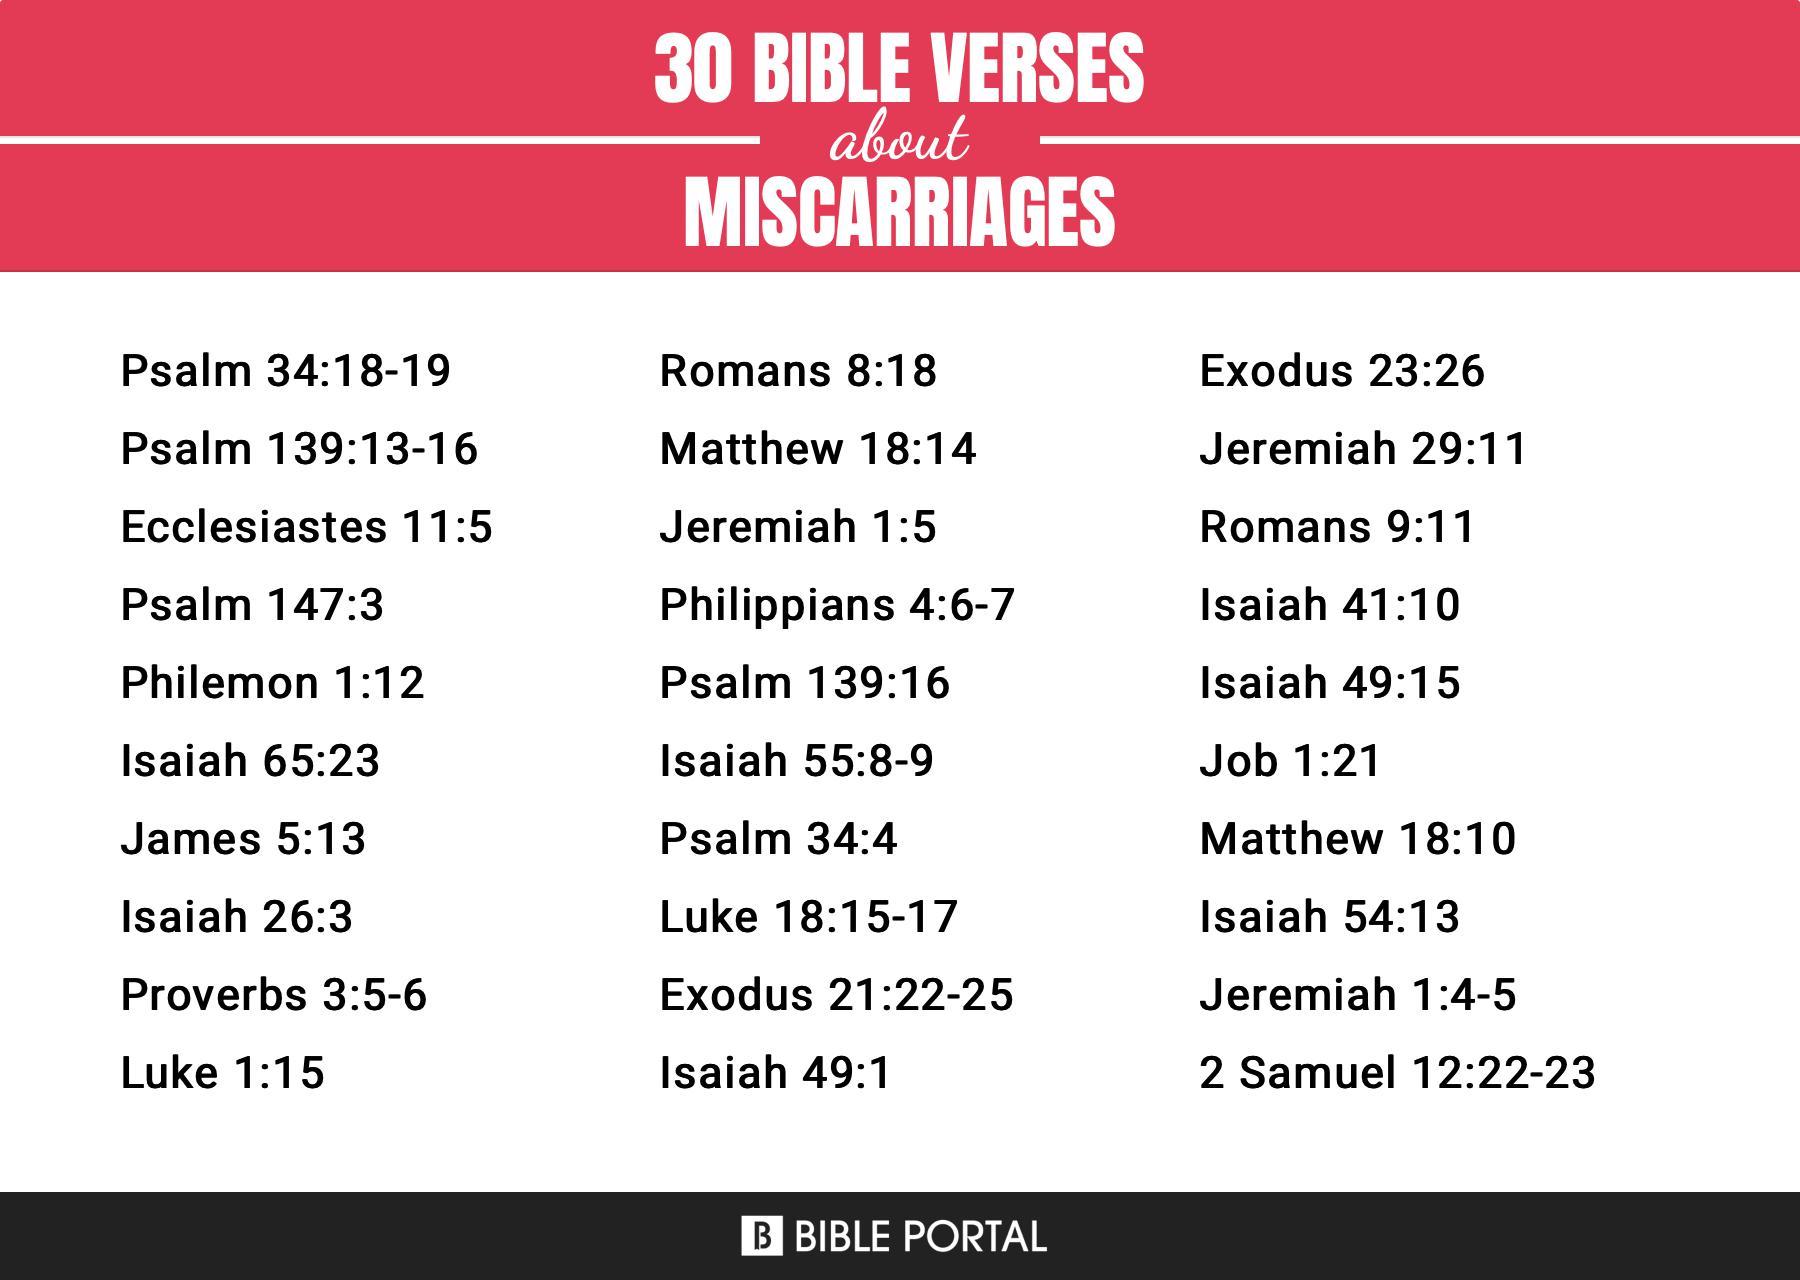 What Does the Bible Say about Miscarriages?